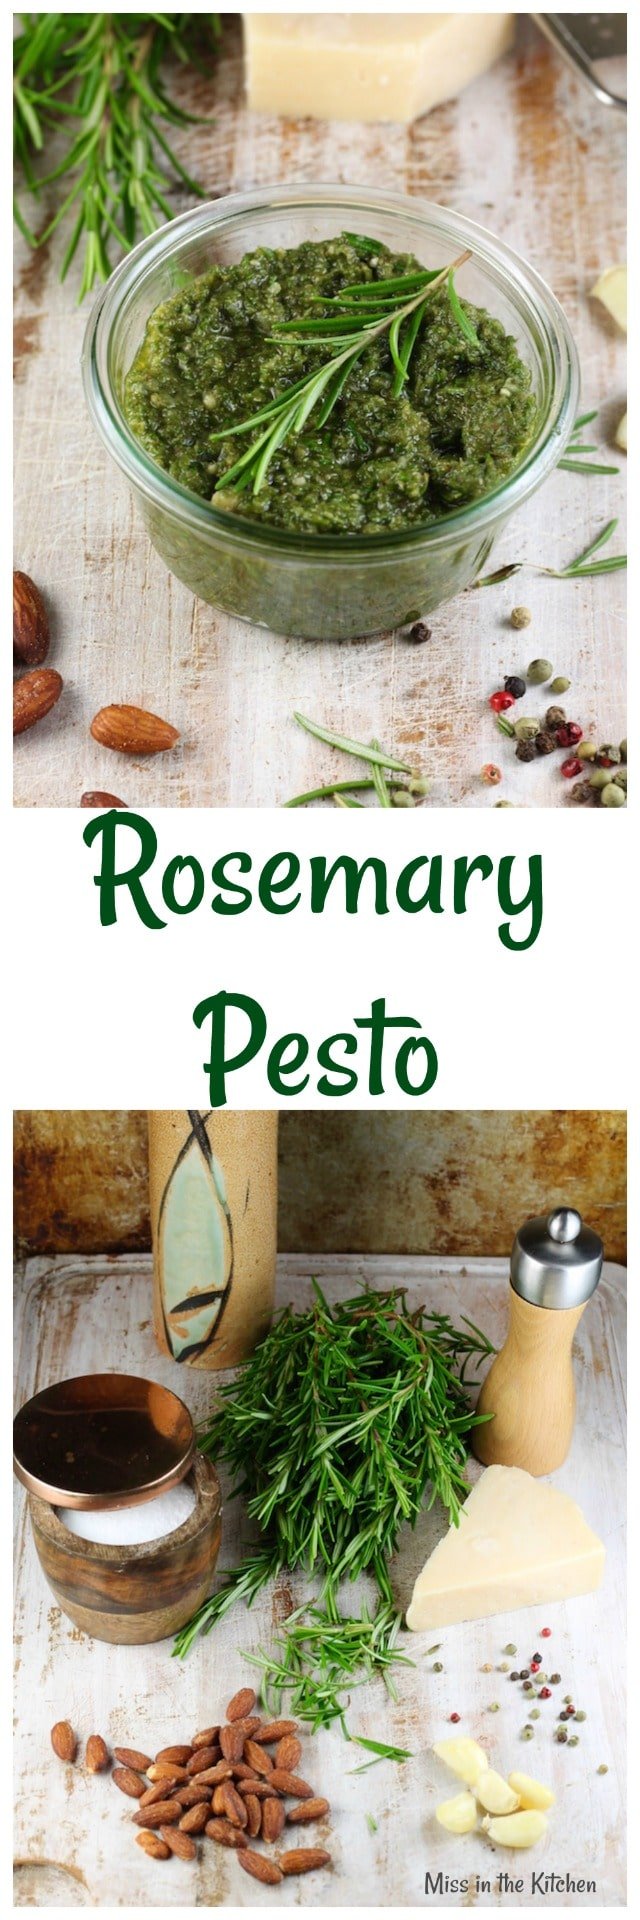 Rosemary Pesto Recipe ~ Adds flavor to so many dishes, from chicken to potatoes to soups or salad dressings! From MissintheKitchen.com